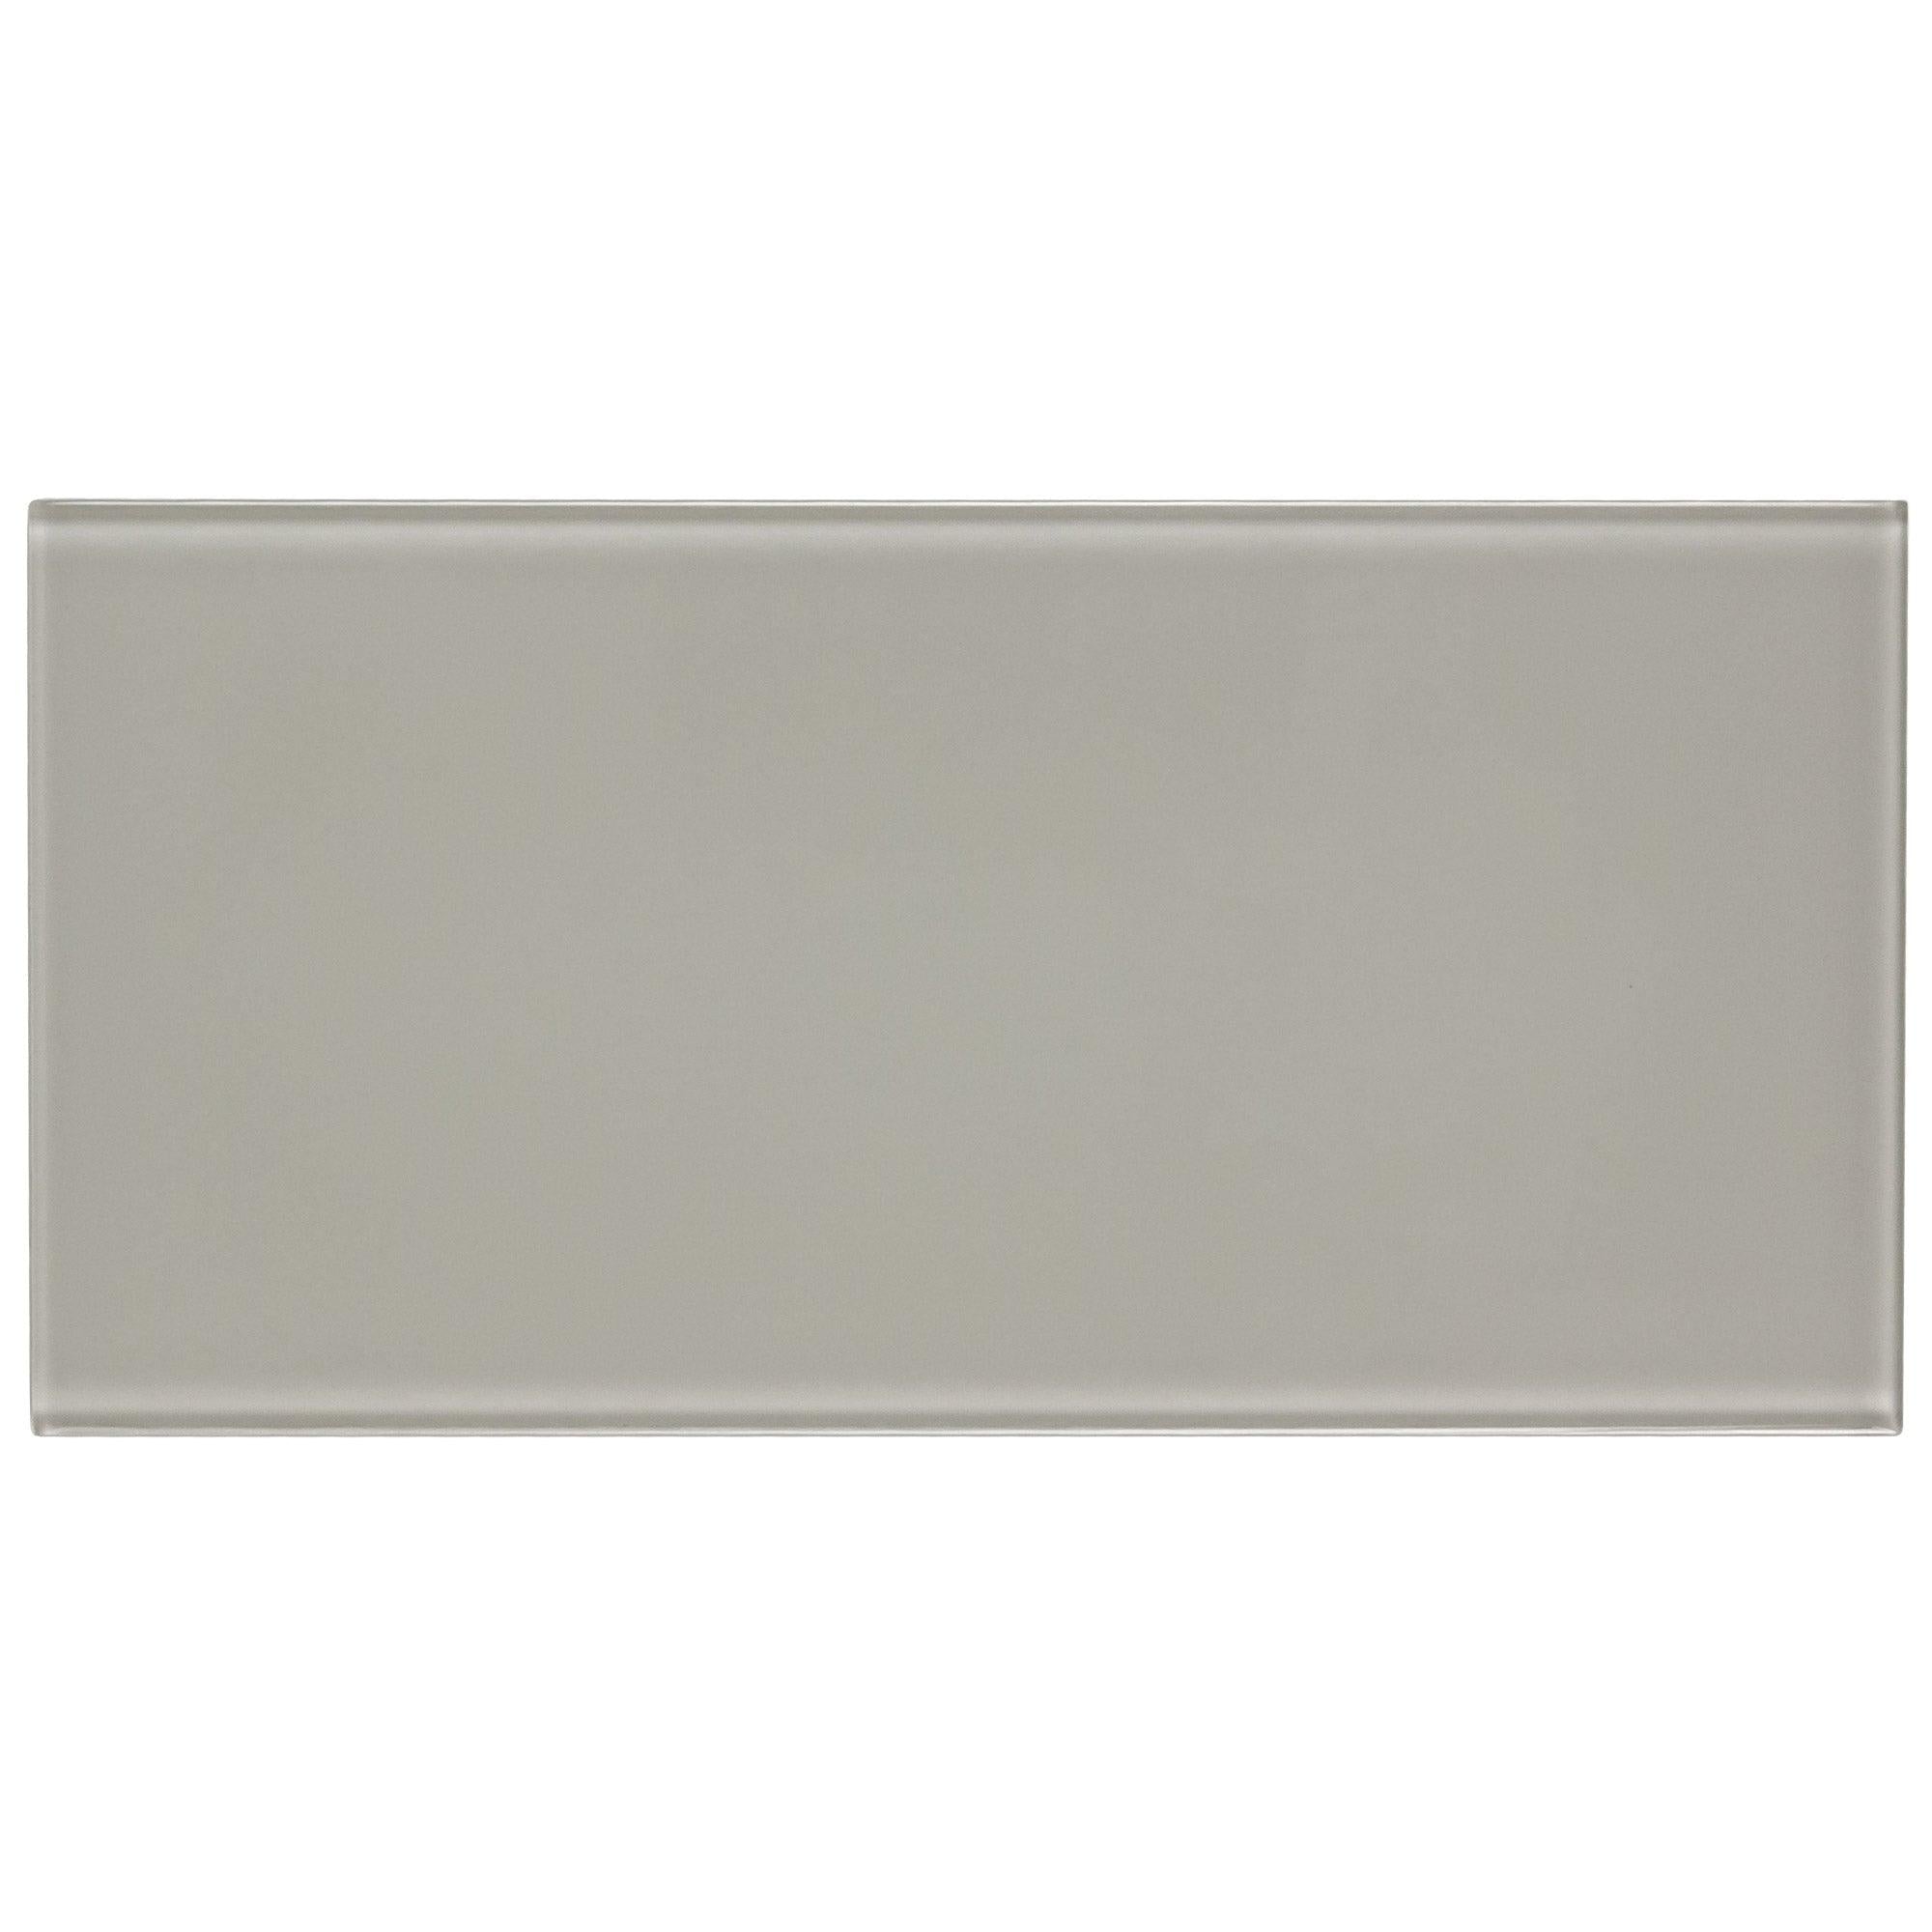 Ceramic Savoy - Gloss White  3x6 in. Field - Renaissance Tile and